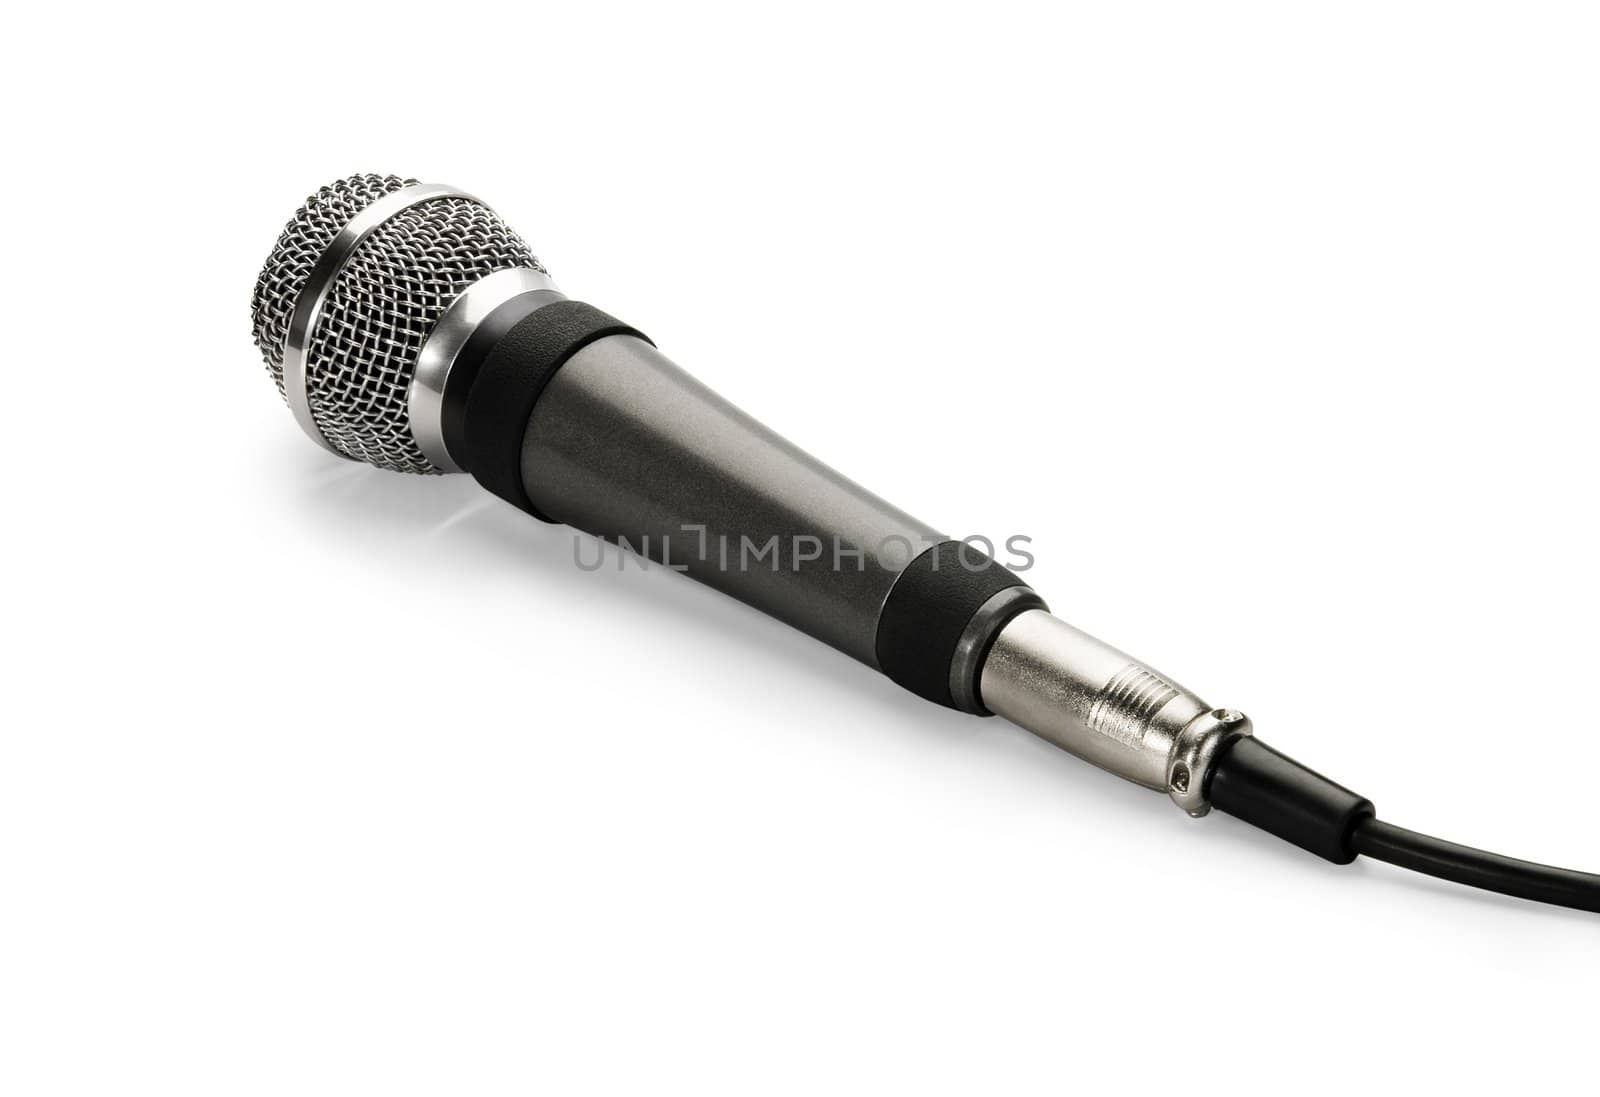 Microphone, isolated on white background.